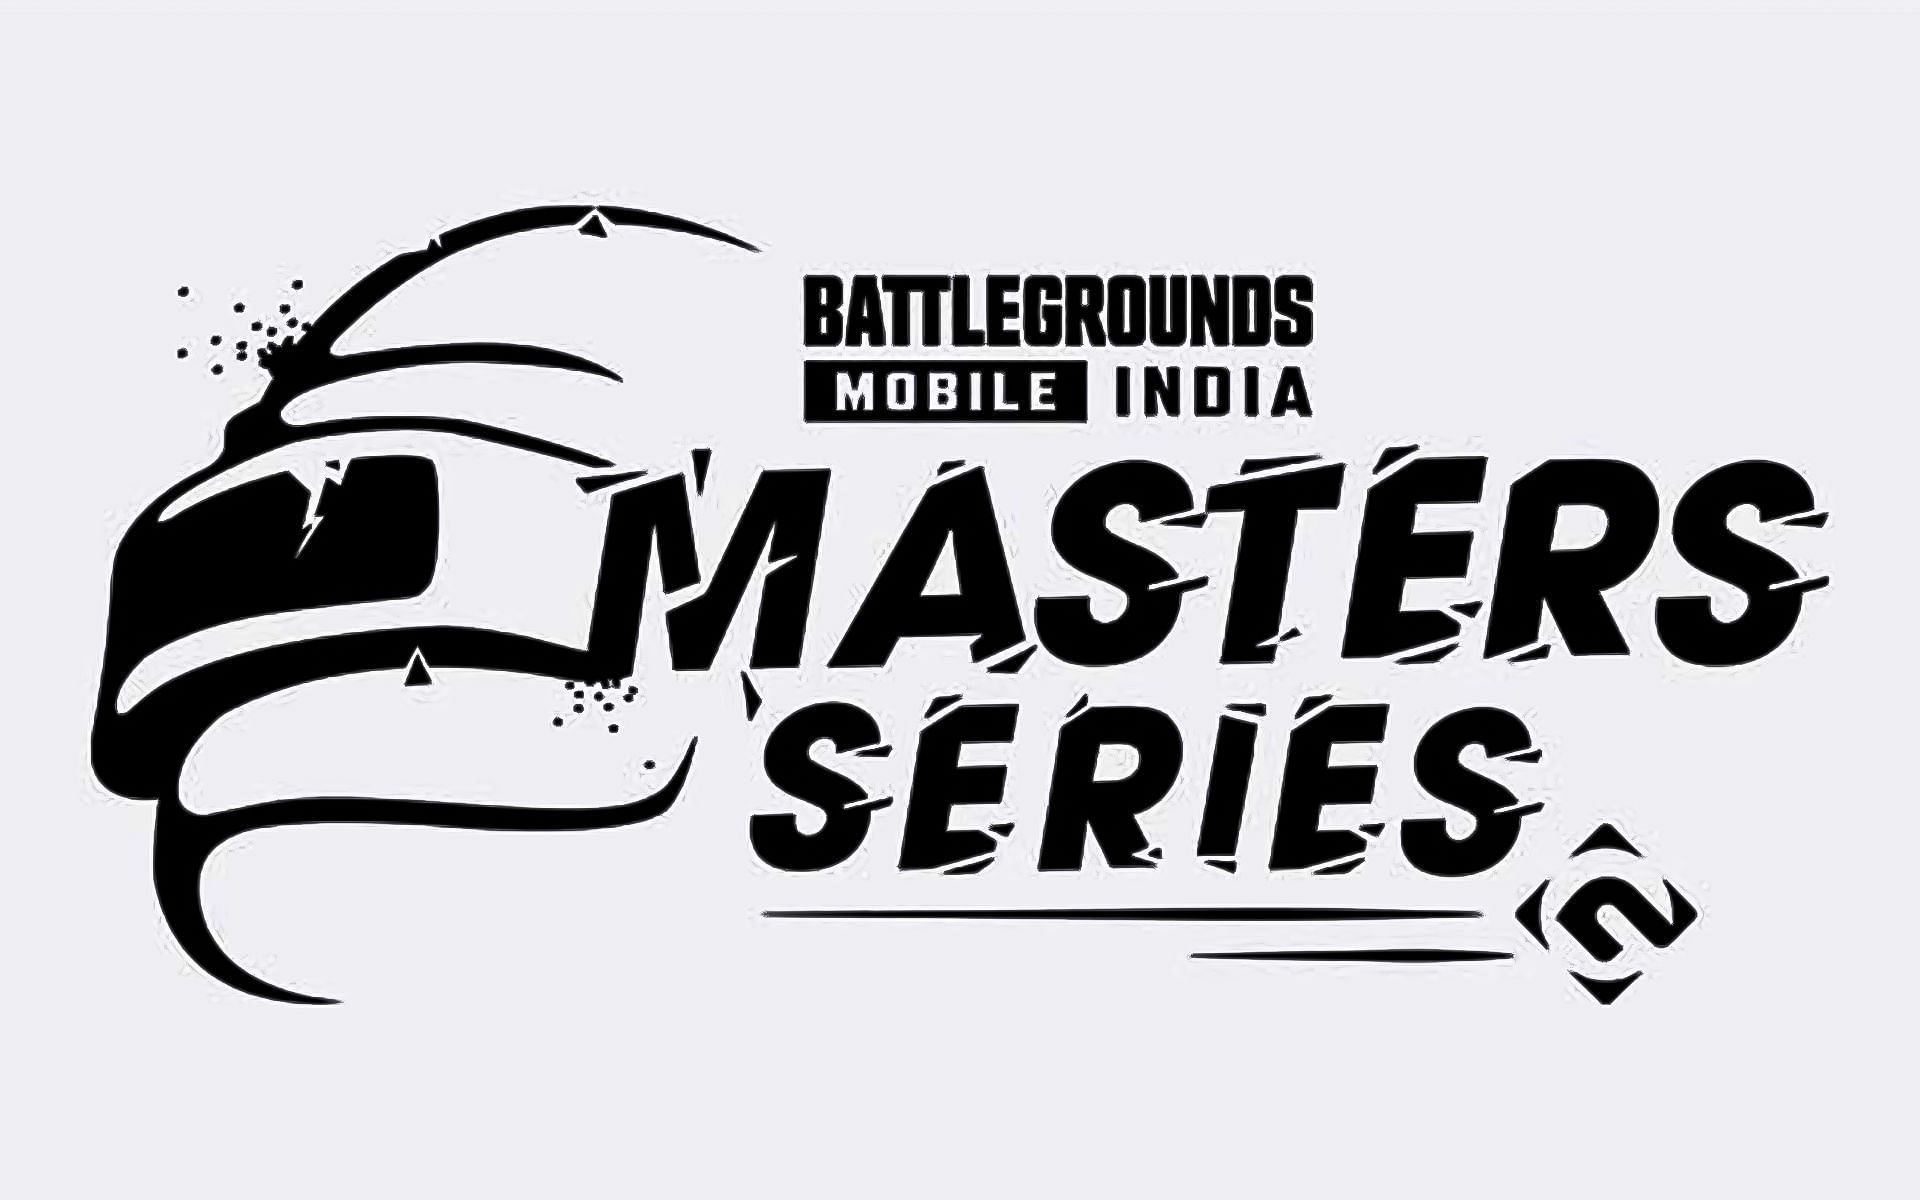 BGMI Masters Series broadcast channel, schedule, organizers, and more